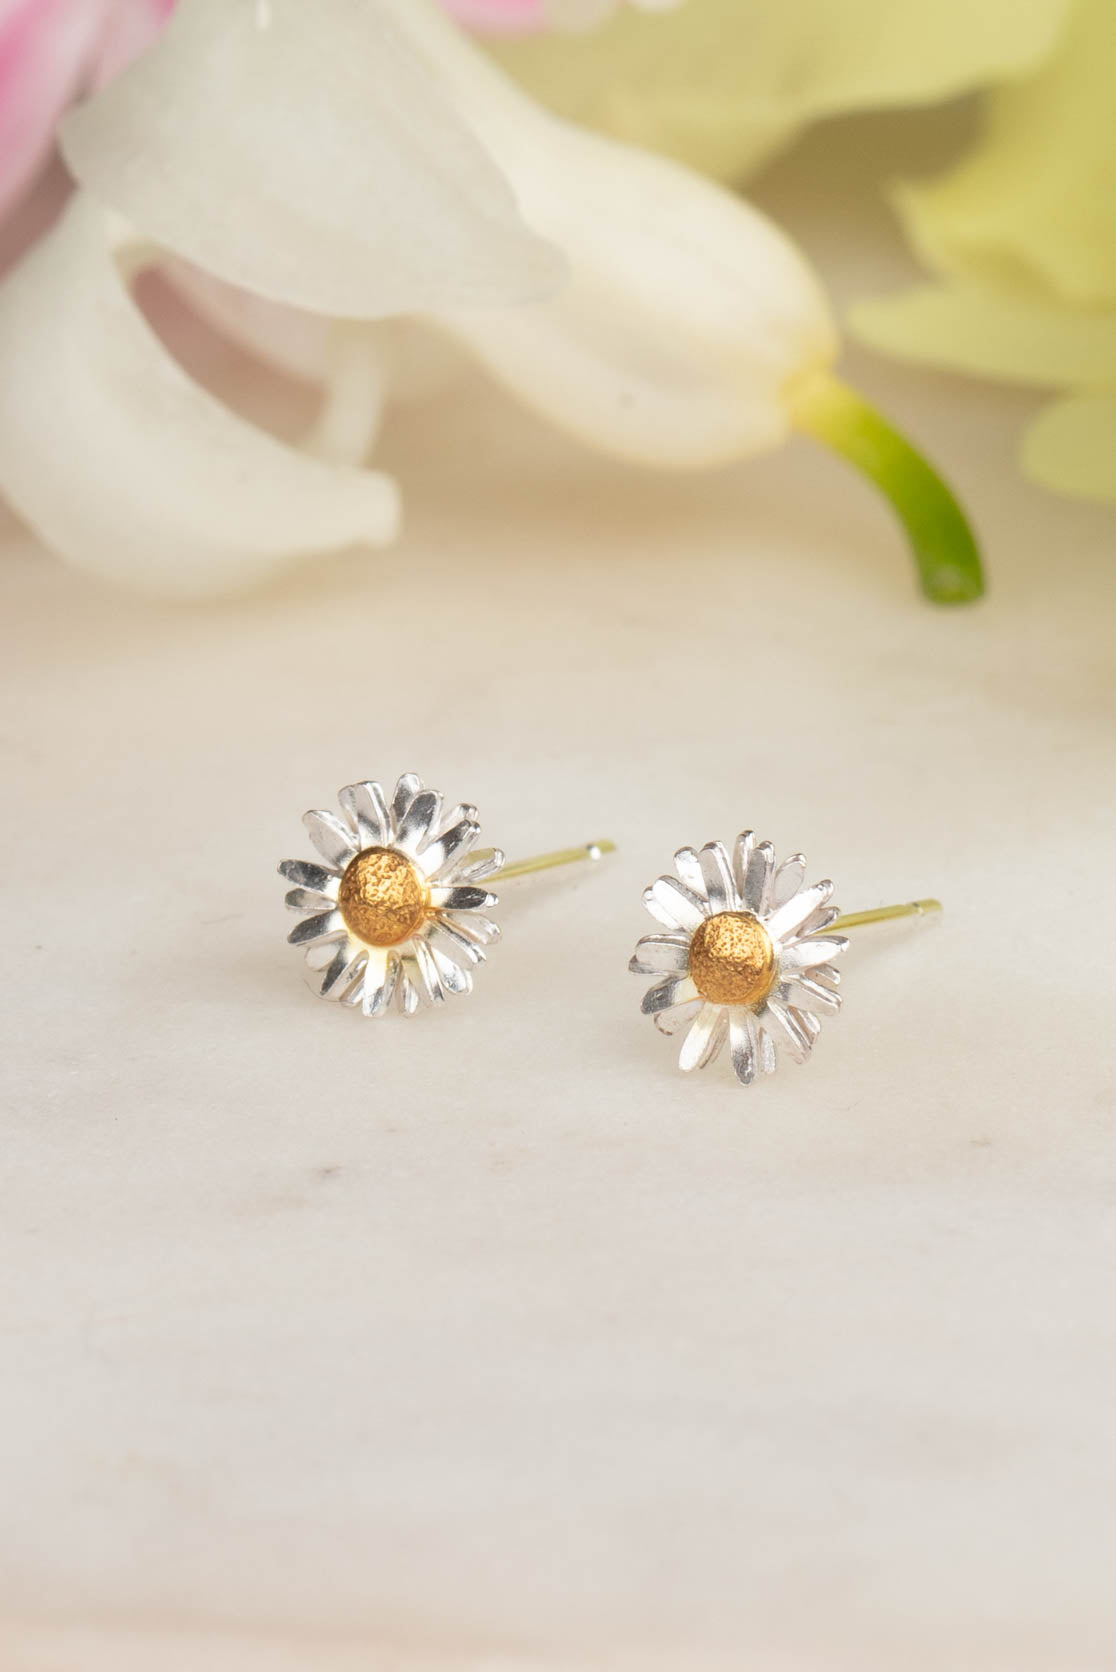 Daisy Stud Earrings in Sterling Silver and Gold